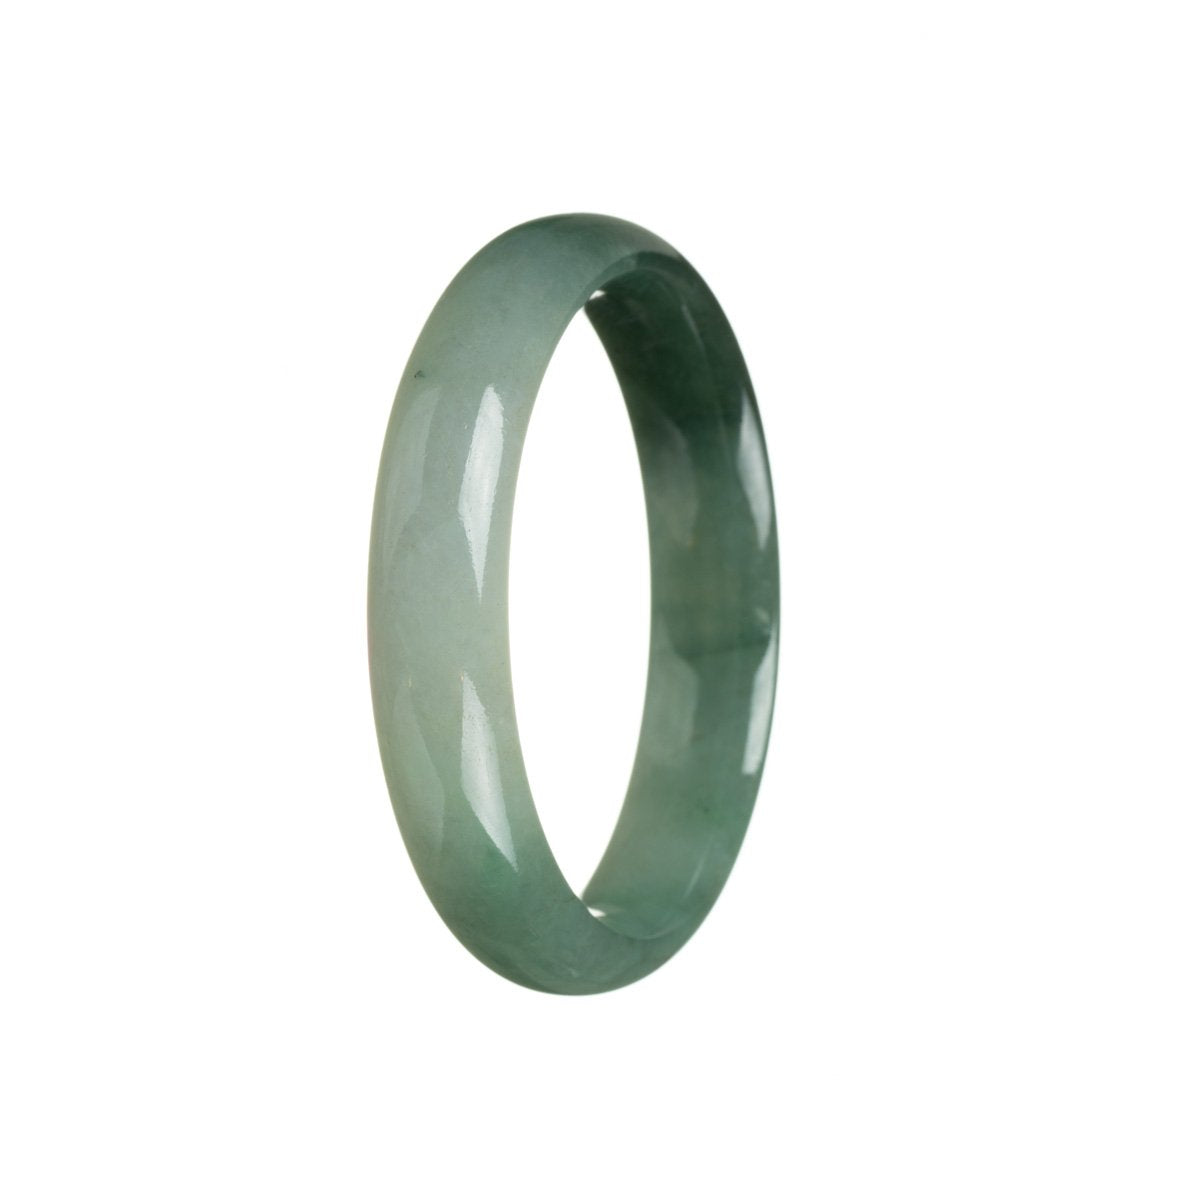 Close-up of a half-moon shaped jade bangle with a rich green color, featuring intricate patterns.